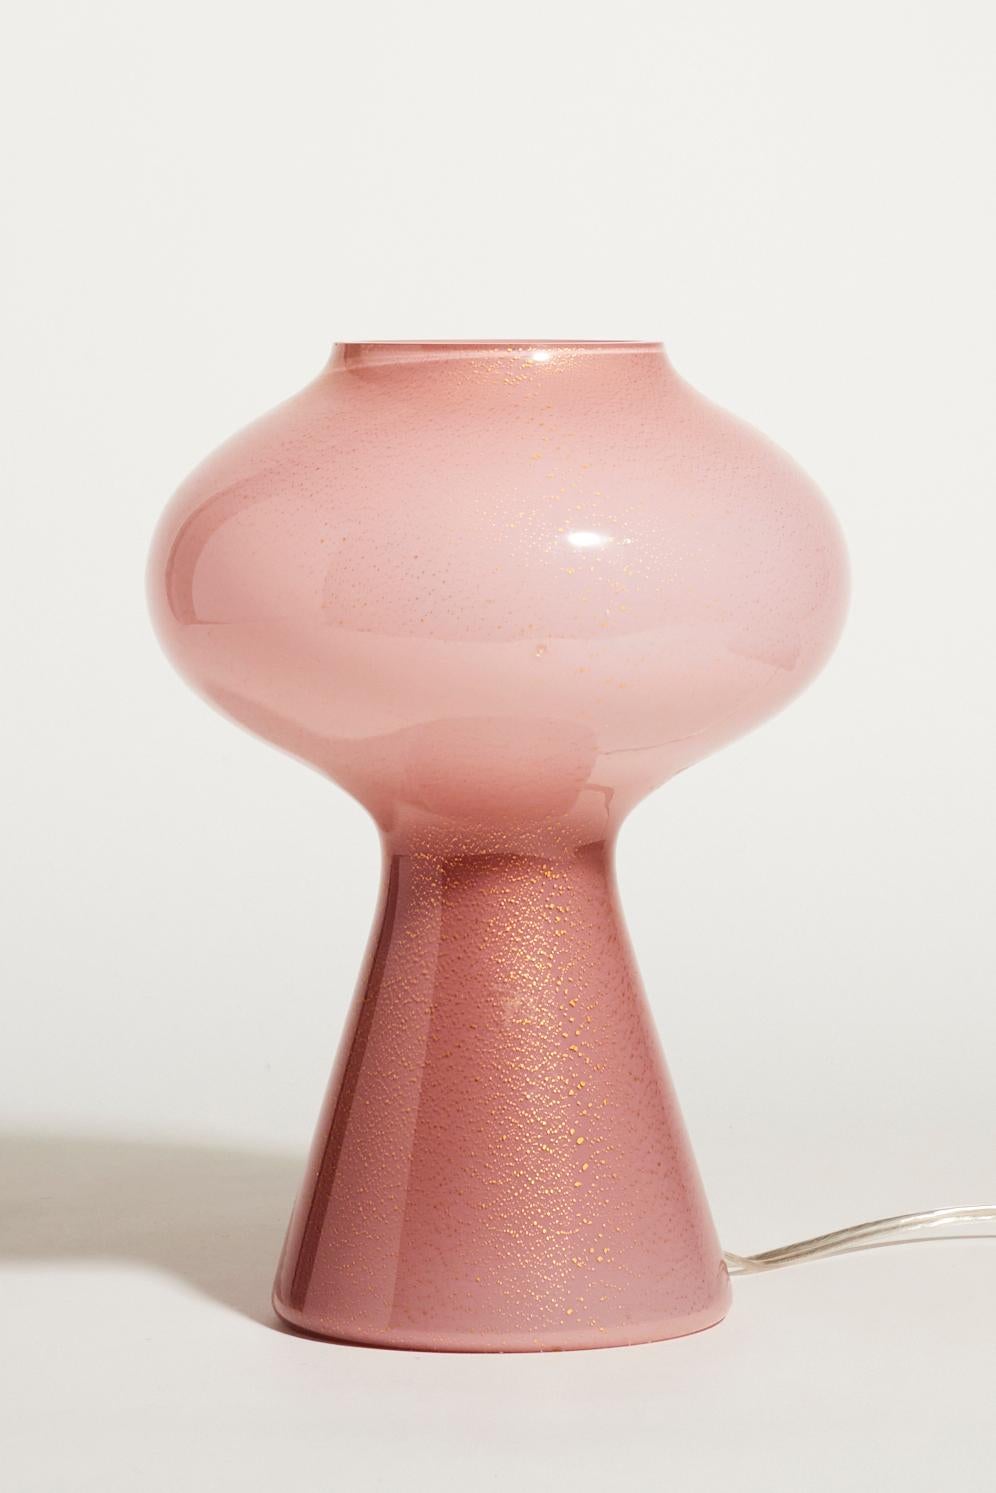 Beautiful mid century Murano lamp in dusty rose glass flecked with gold
 It was in production for several decades, these lights were produced in different sizes and this is the smaller version.